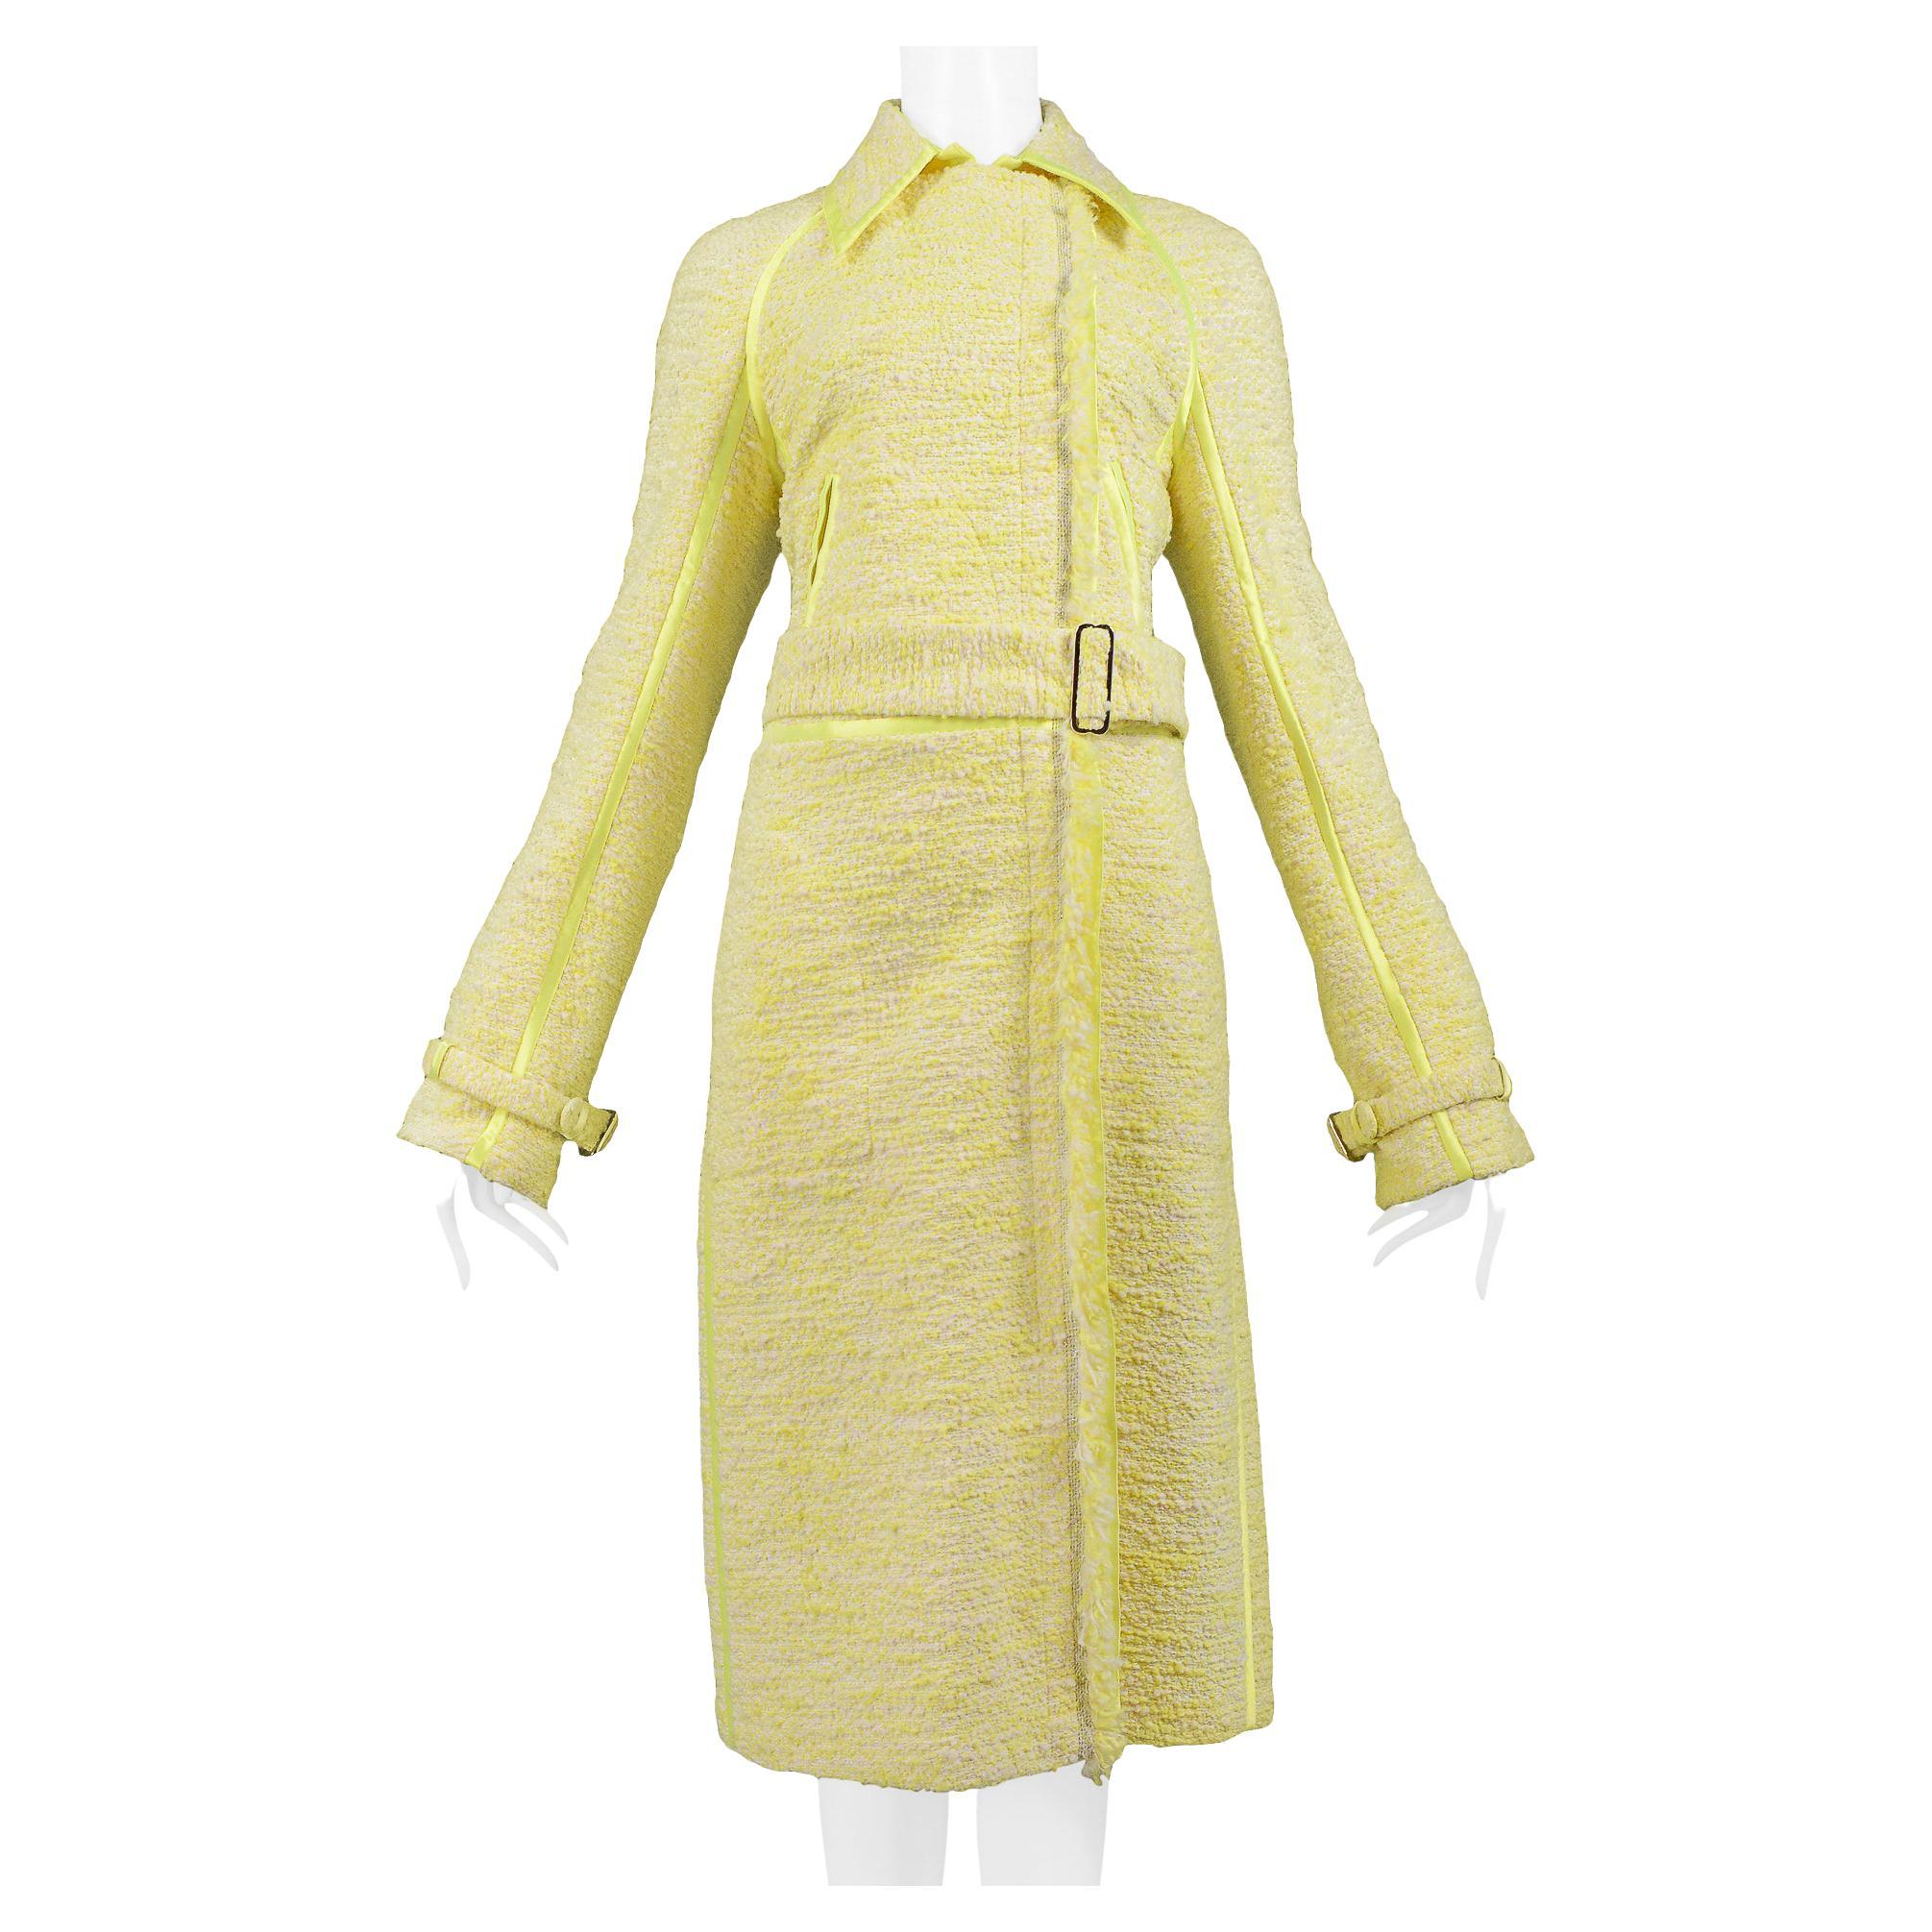 Gianfranco Ferre Citron Yellow Boucle Belted Coat 2004 For Sale